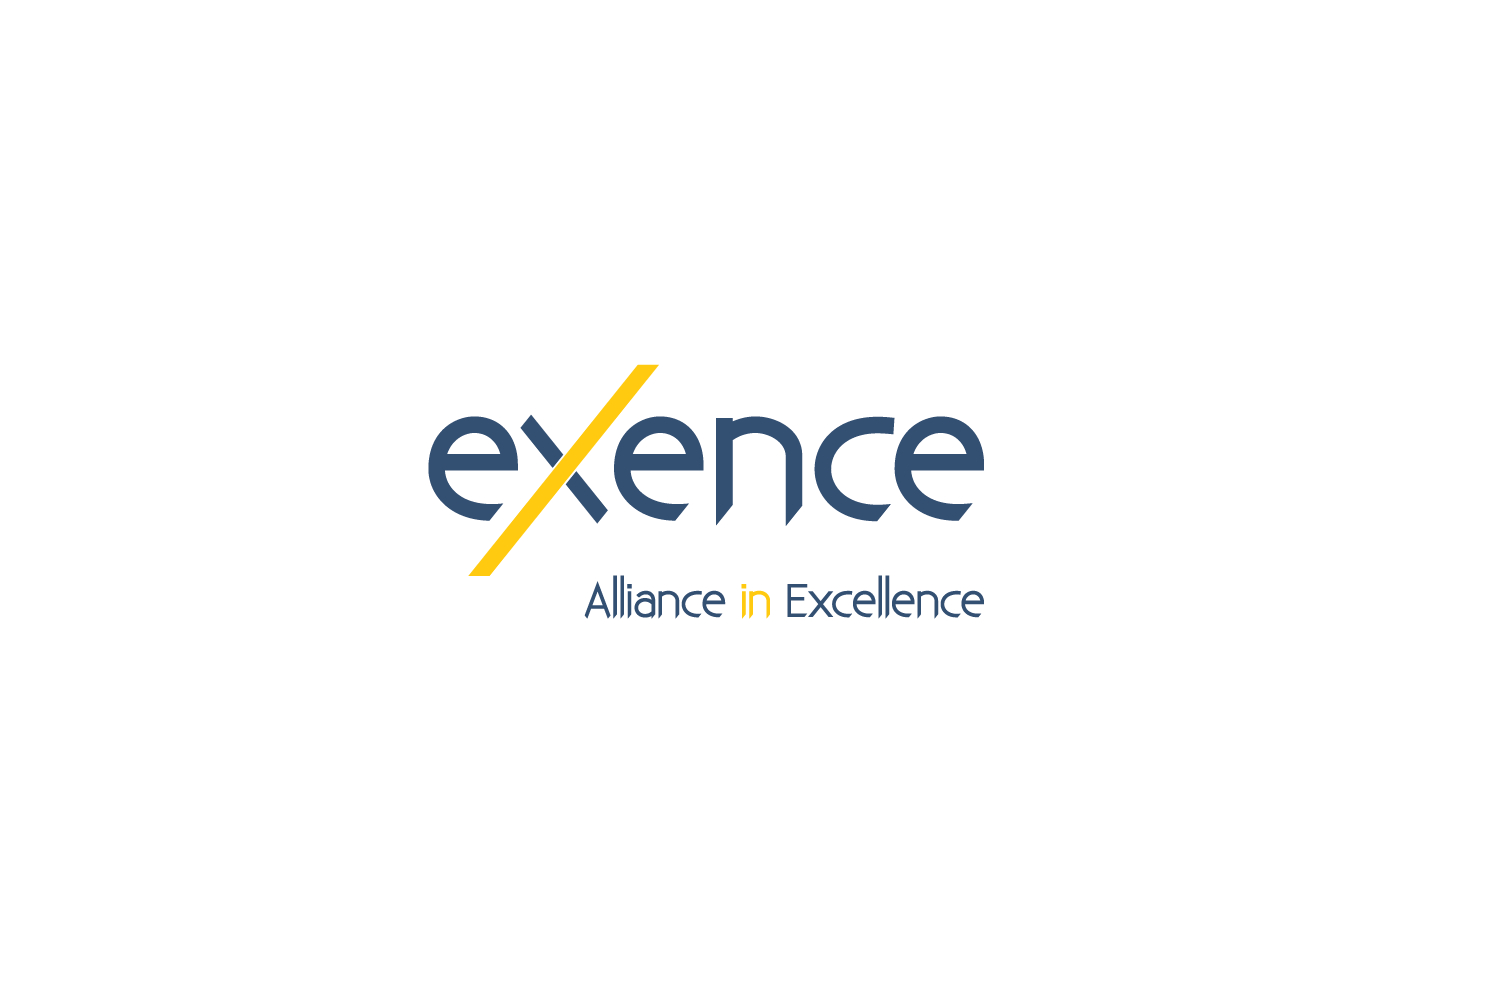 Exence SA is this year’s GOLDEN Sponsor of the International Oktoberfest!